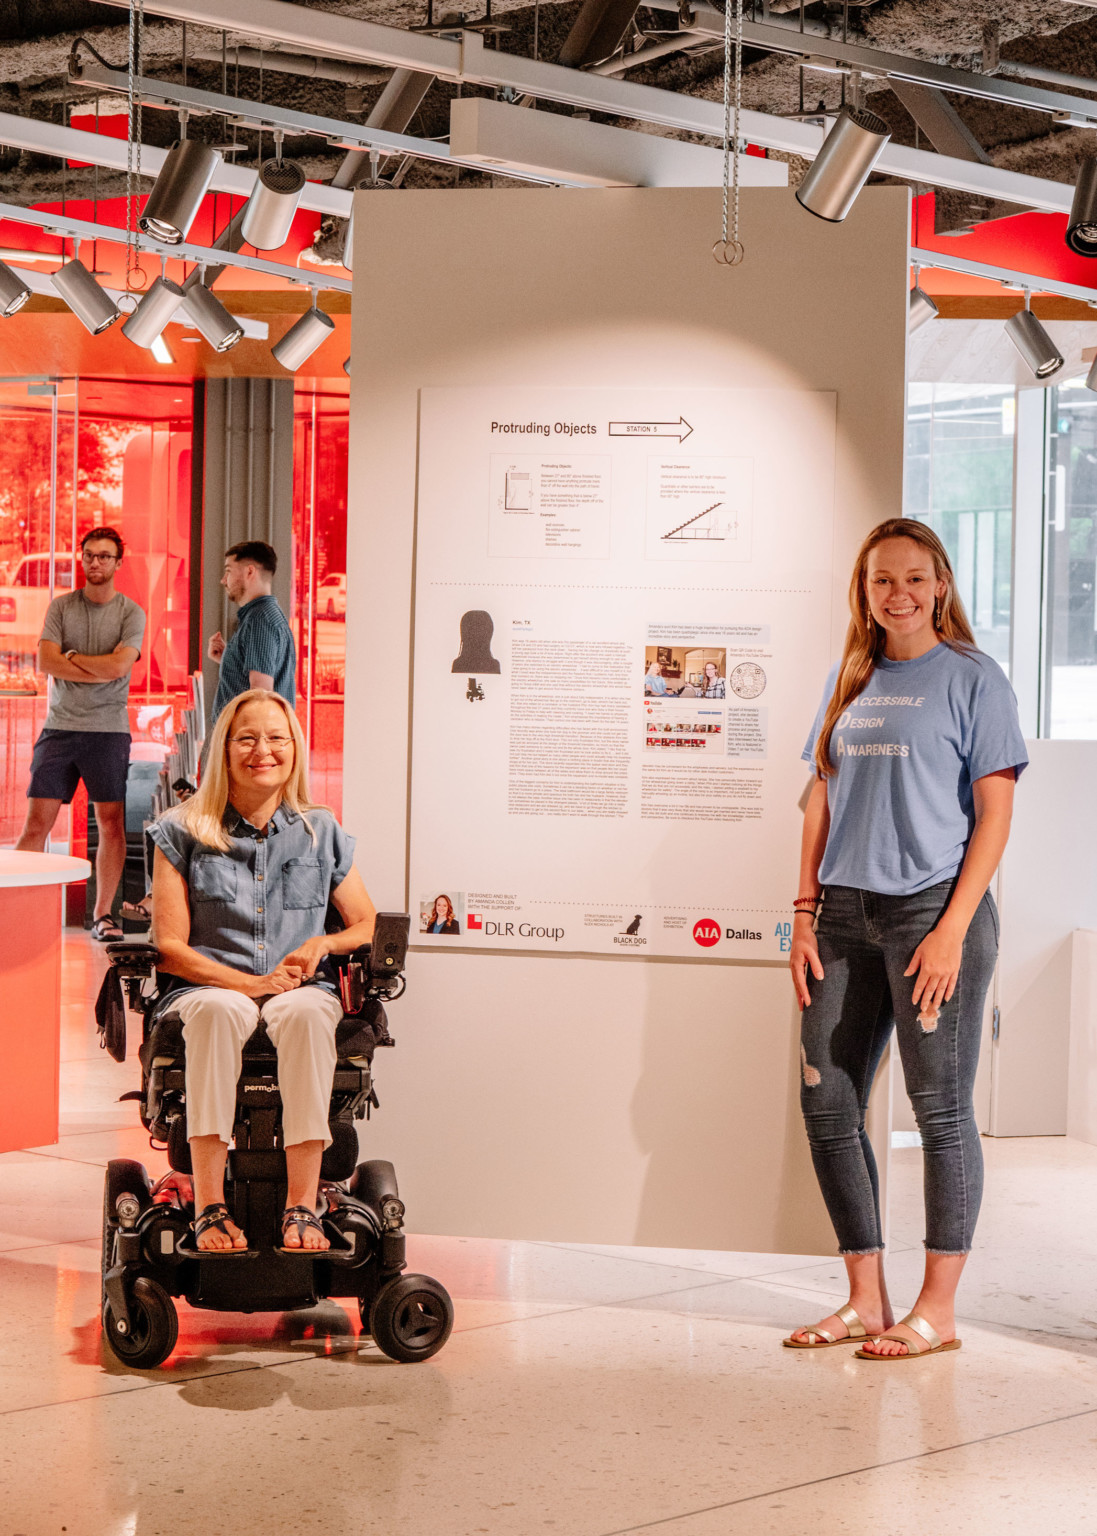 2 women in front of hanging white panel with information and charts in red room. Woman, left, sits in wheelchair.